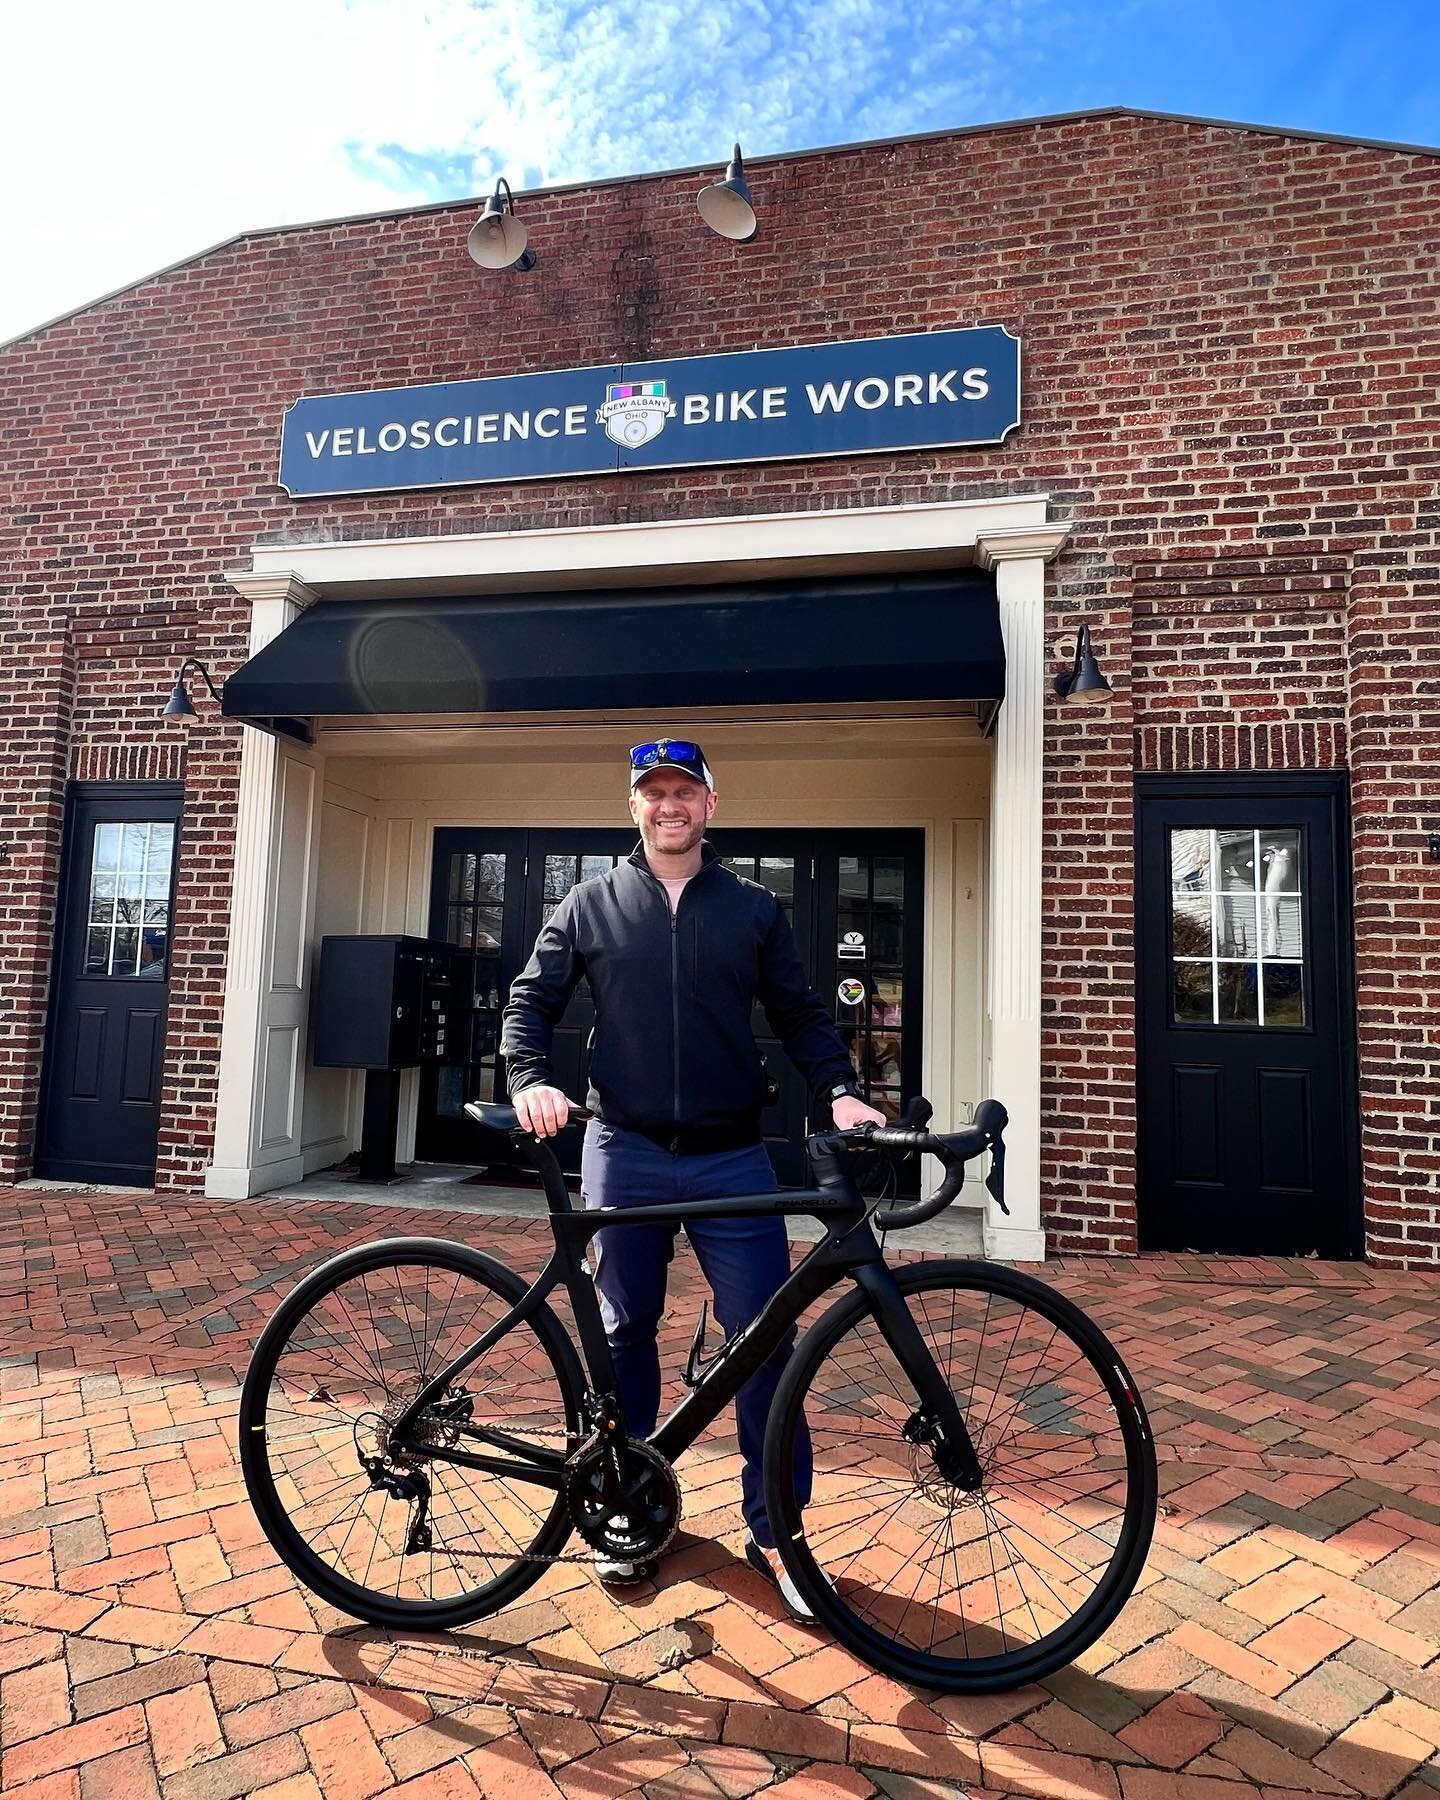 New bike day! 

After 15+ years and tens of thousands of miles on my current road bike, It was time for an upgrade. N+1 😬 

Thank you to the team over at VeloScience, they had a deal on a Pinarello Paris that I couldn&rsquo;t refuse! 

Excited to pu